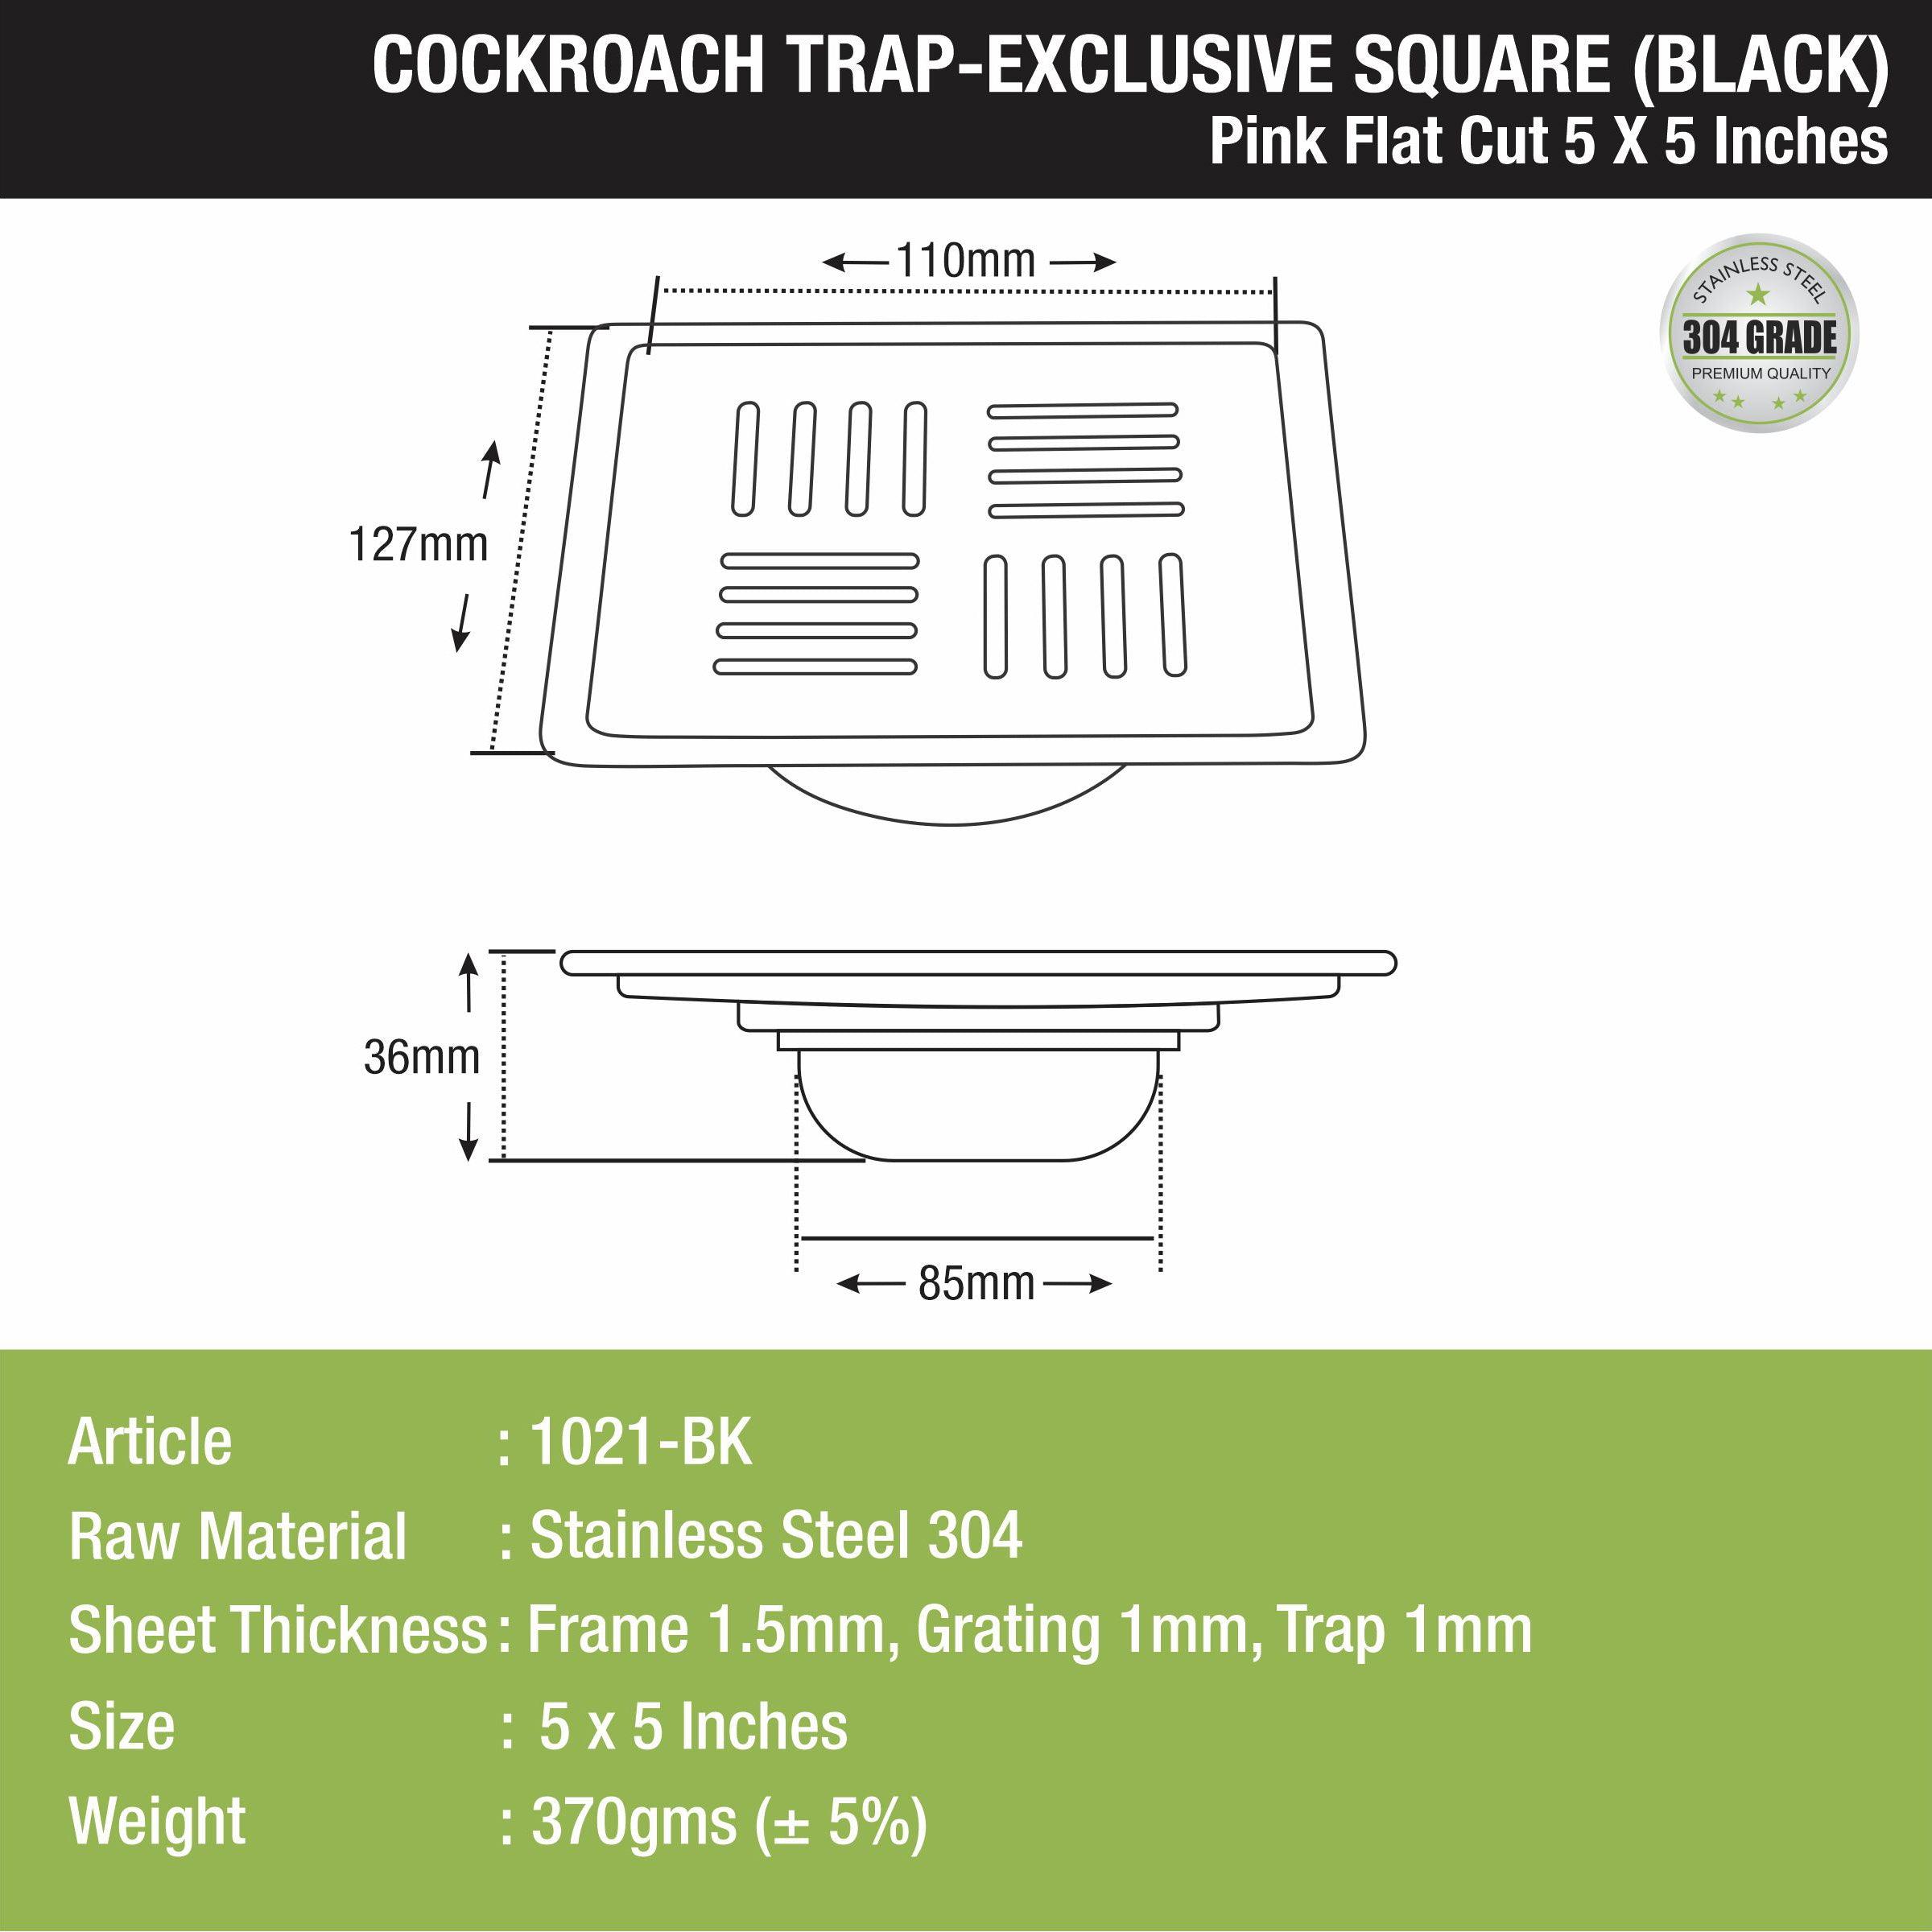 Pink Exclusive Square Flat Cut Floor Drain in Black PVD Coating (5 x 5 Inches) with Cockroach Trap  size and measurement